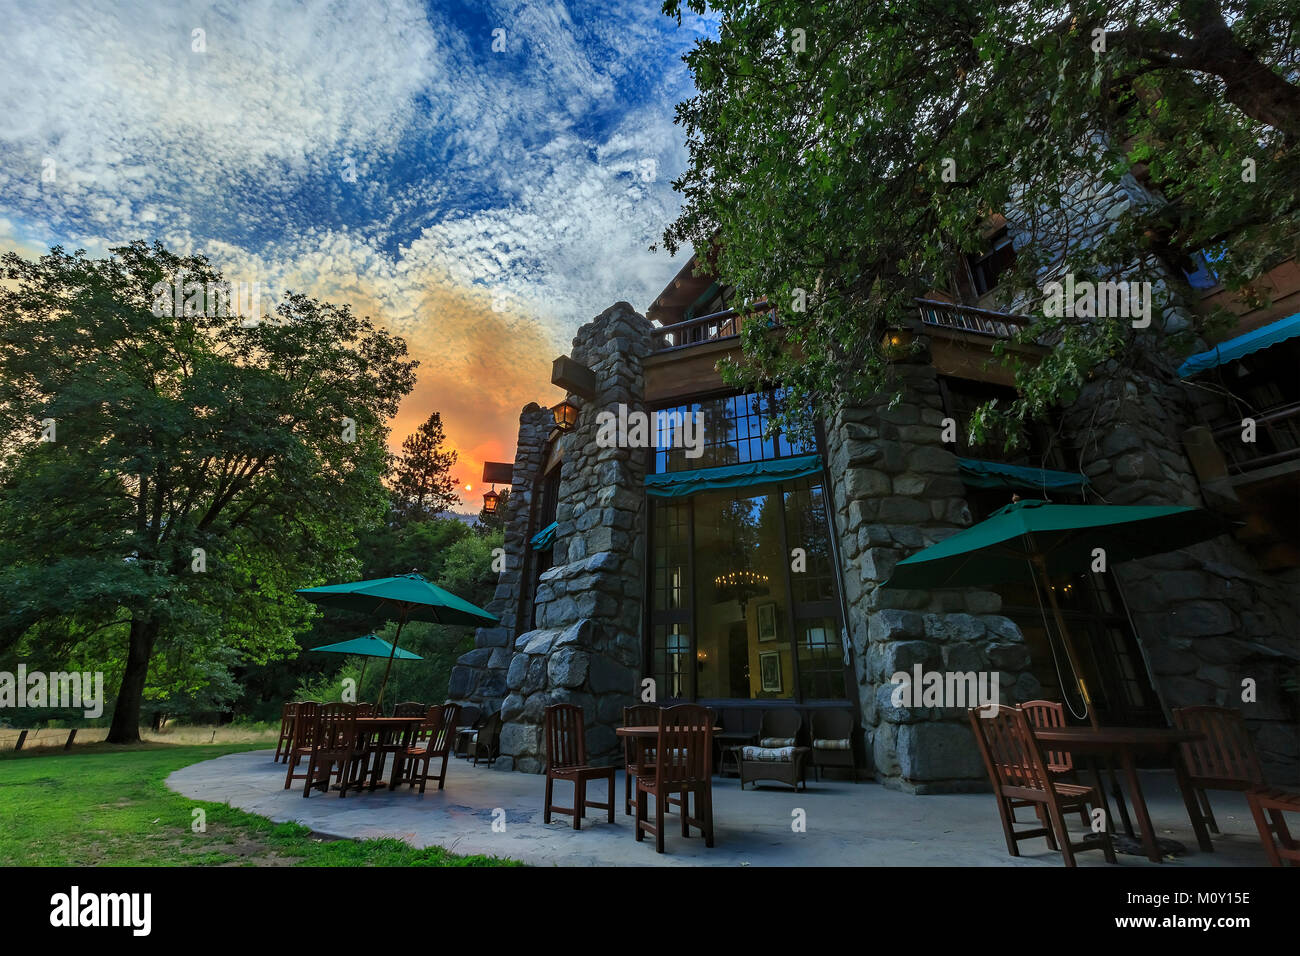 Afternoon view of the famous historical Ahwahnee hotel in Yosemite National Park, California Stock Photo